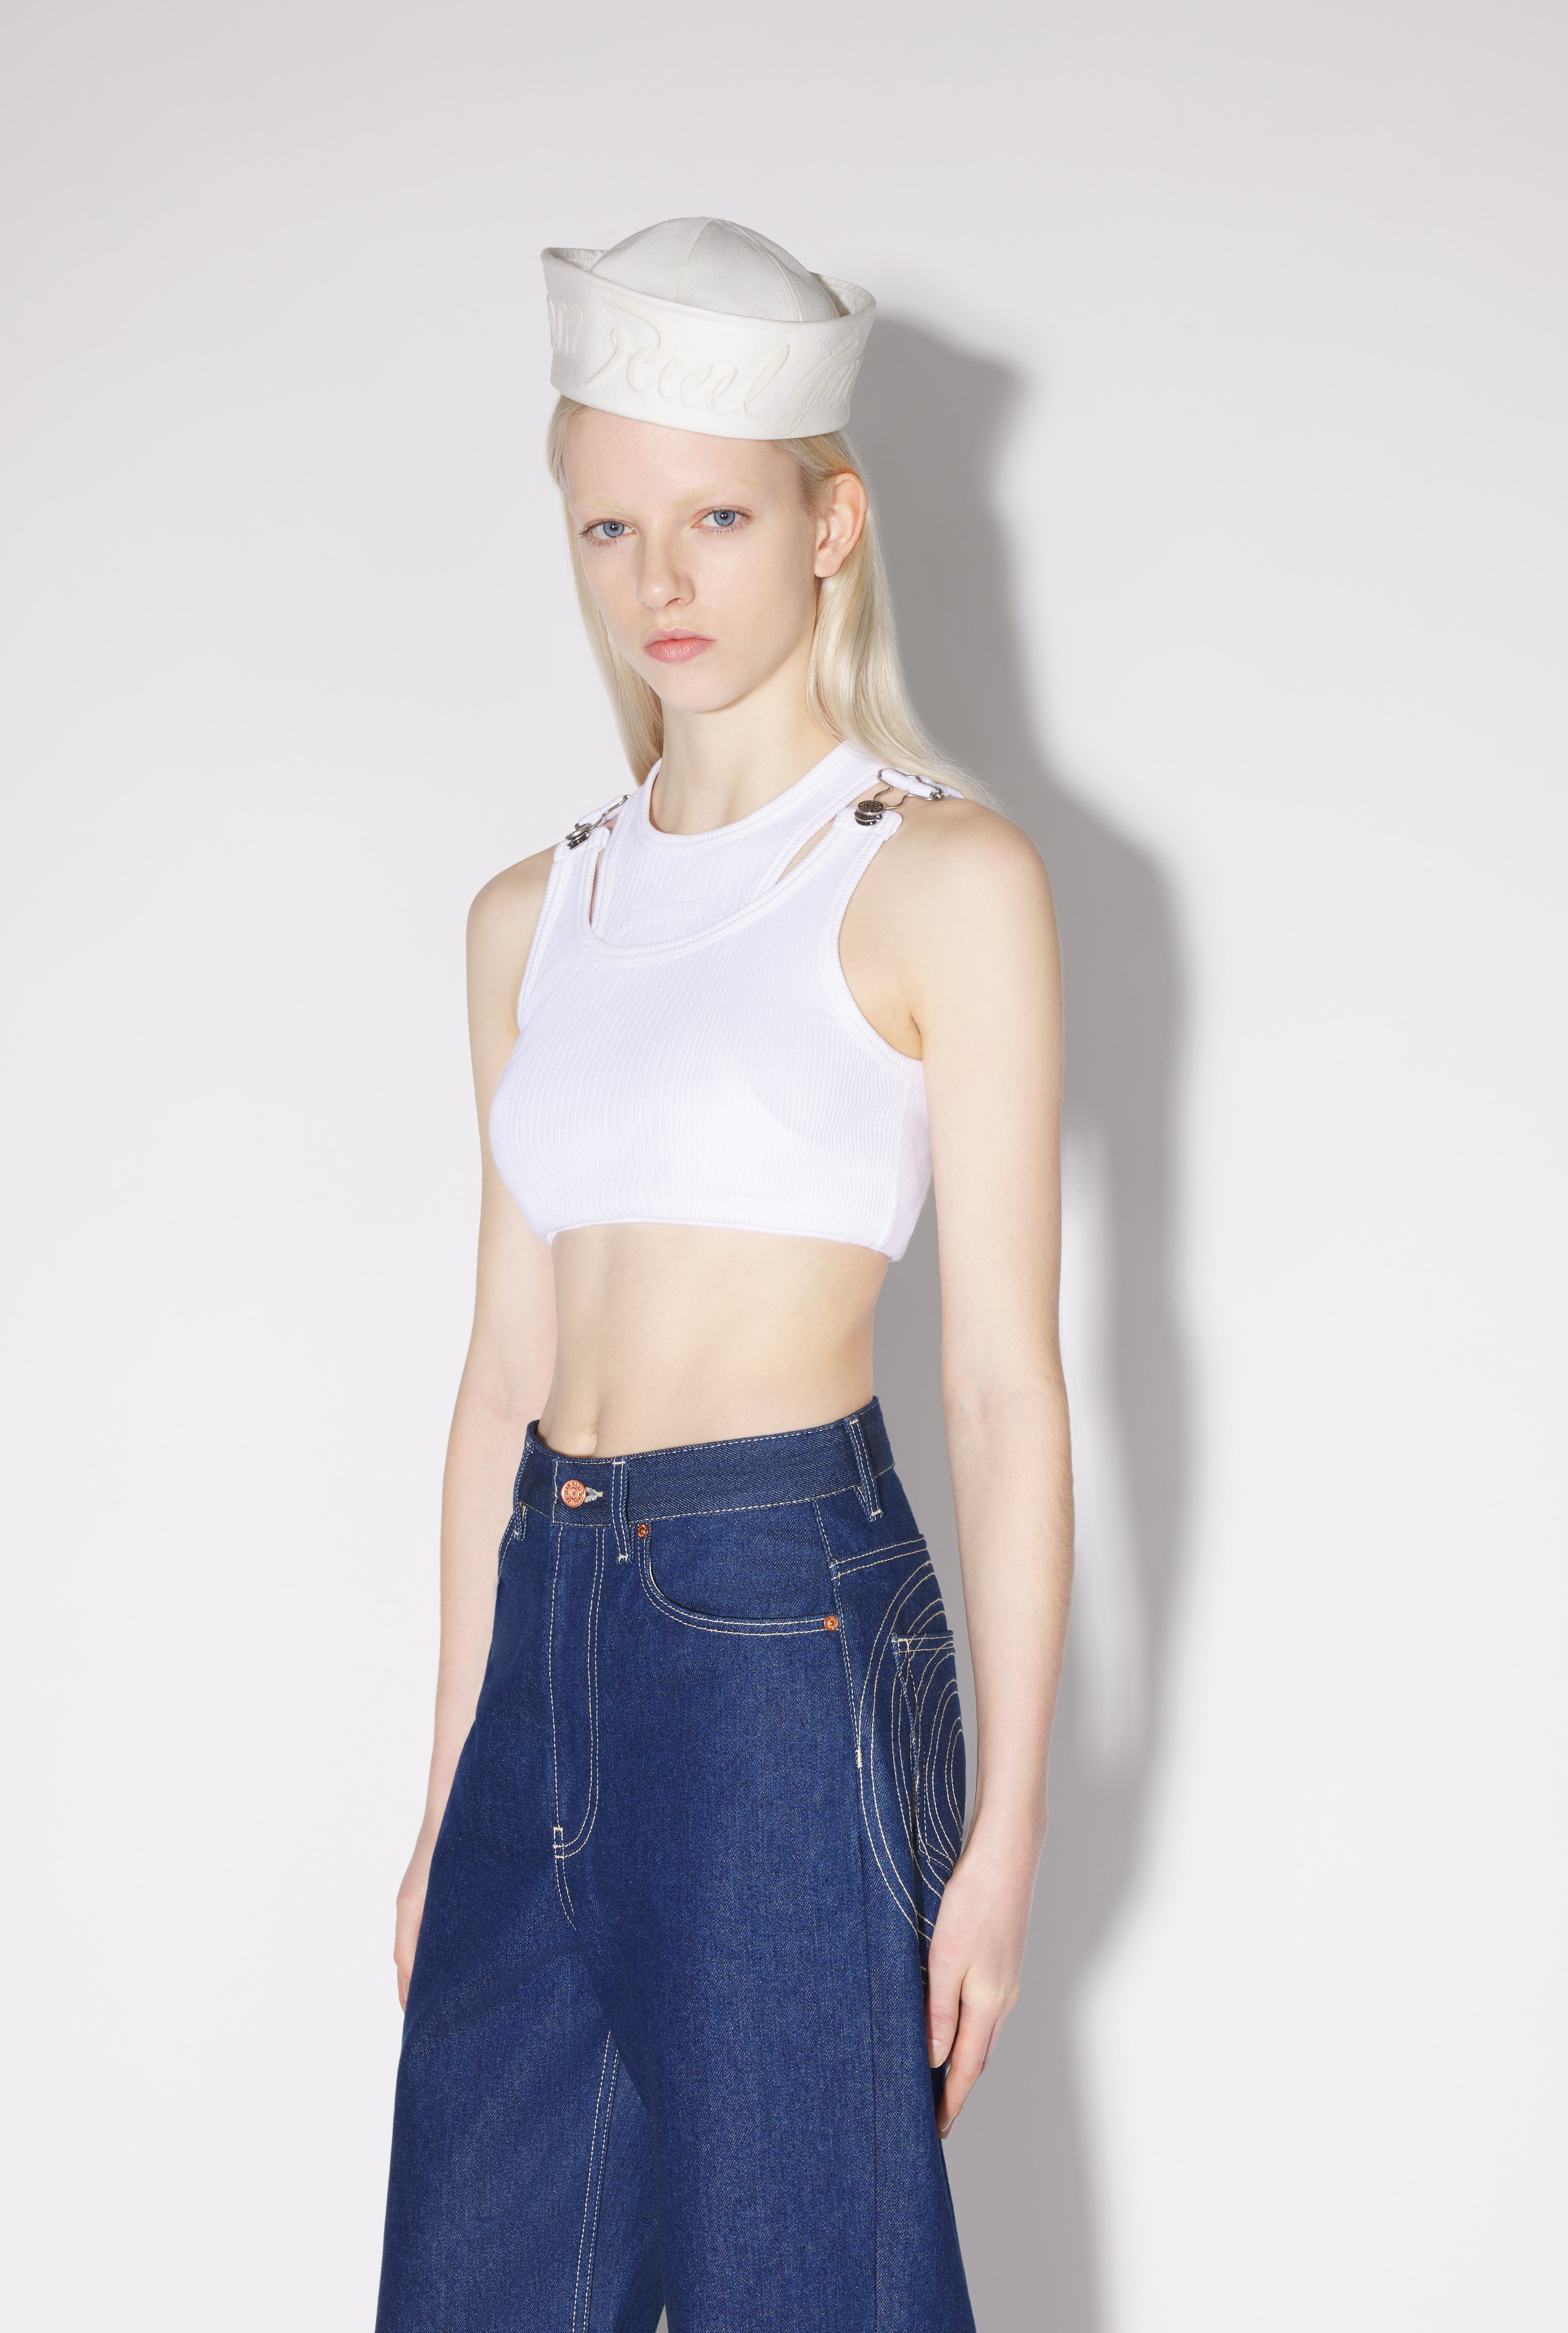 The White Strapped Crop Top